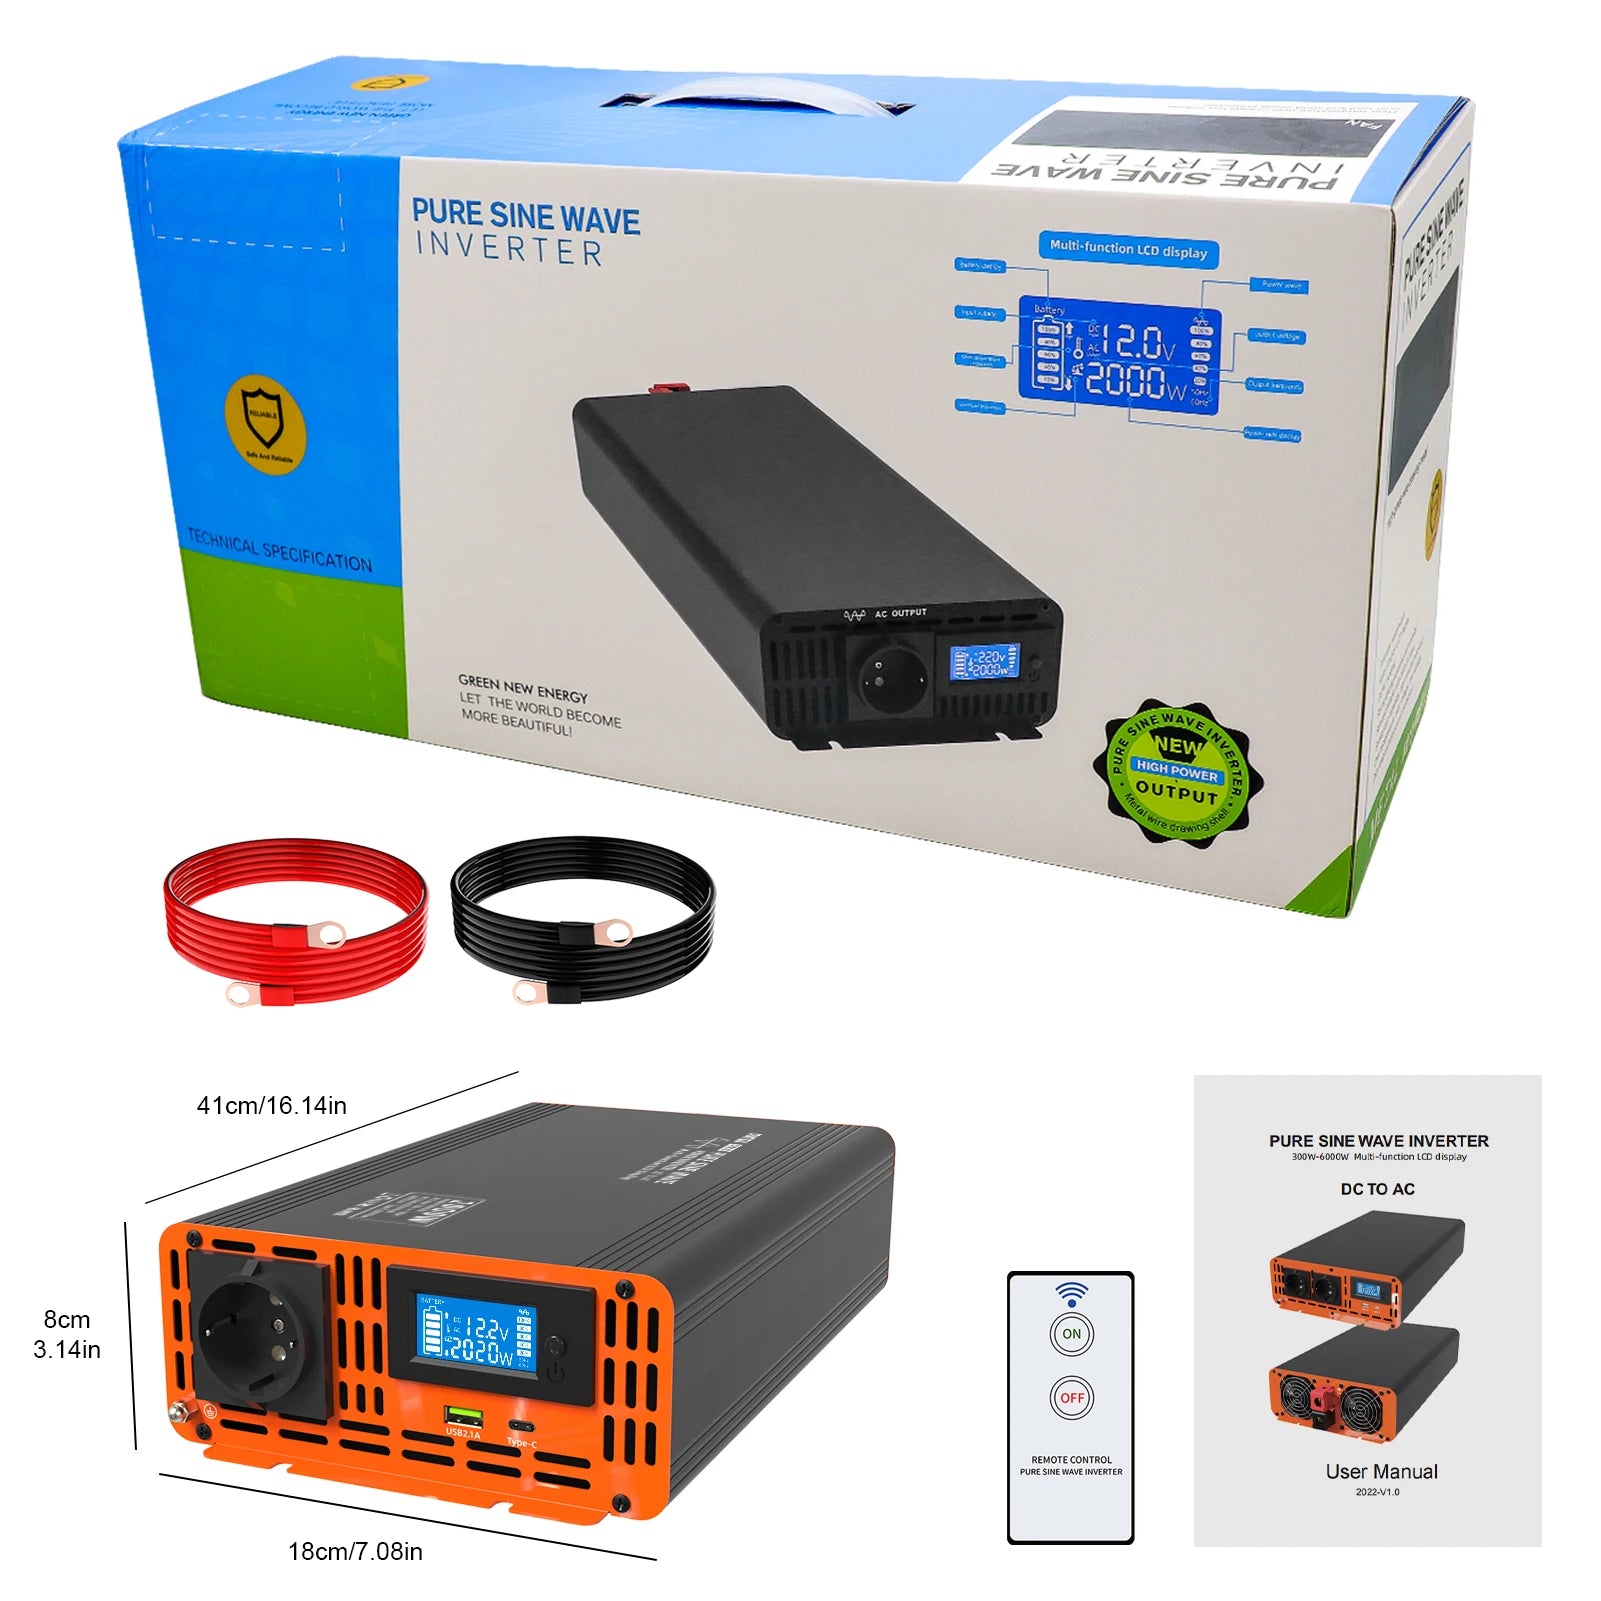 DATOUBOSS Pure Sine Wave Inverter, High-power inverter converting DC to AC power with LCD display and remote control.